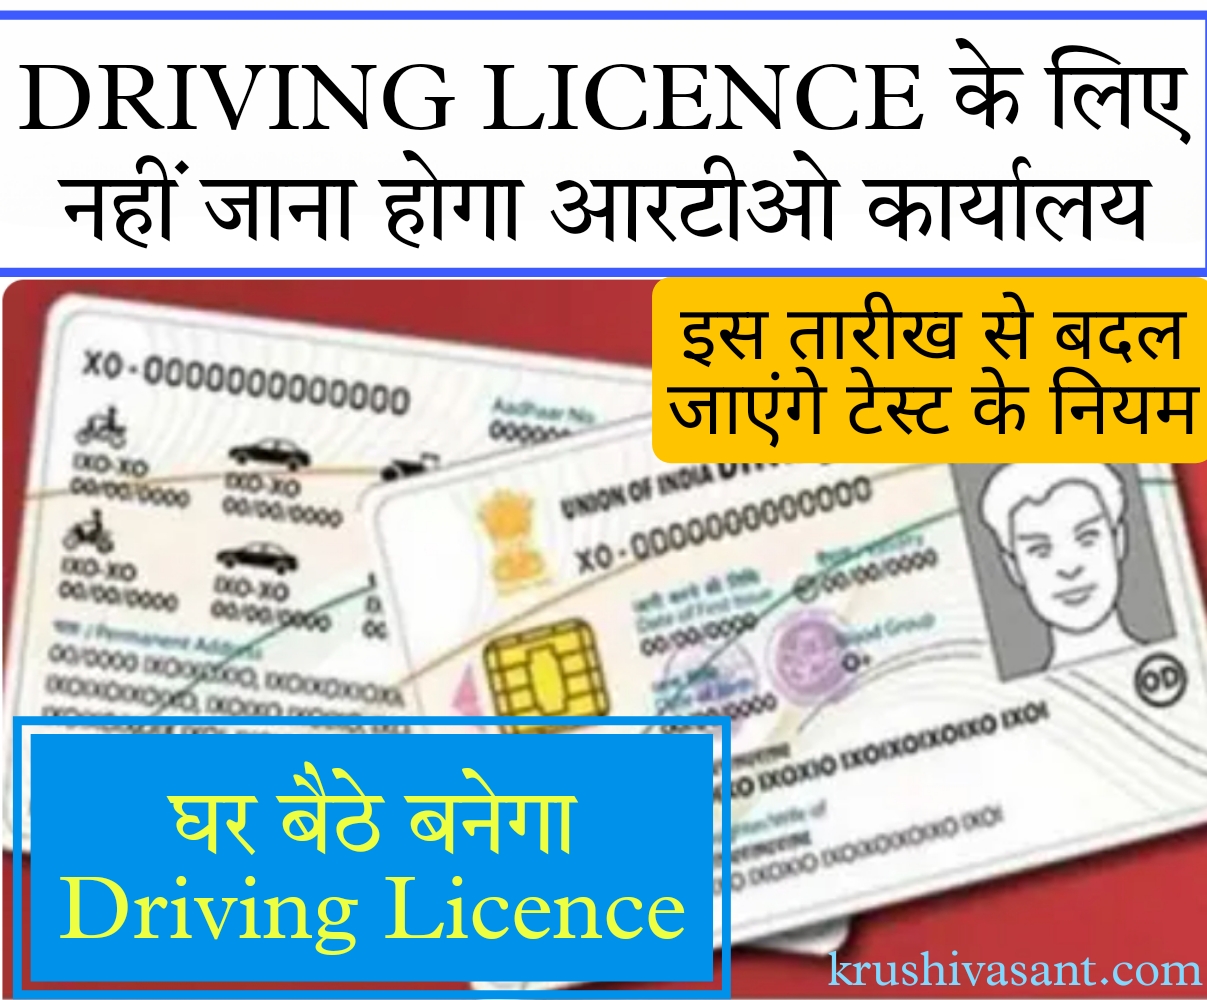 Driving licence pvc card